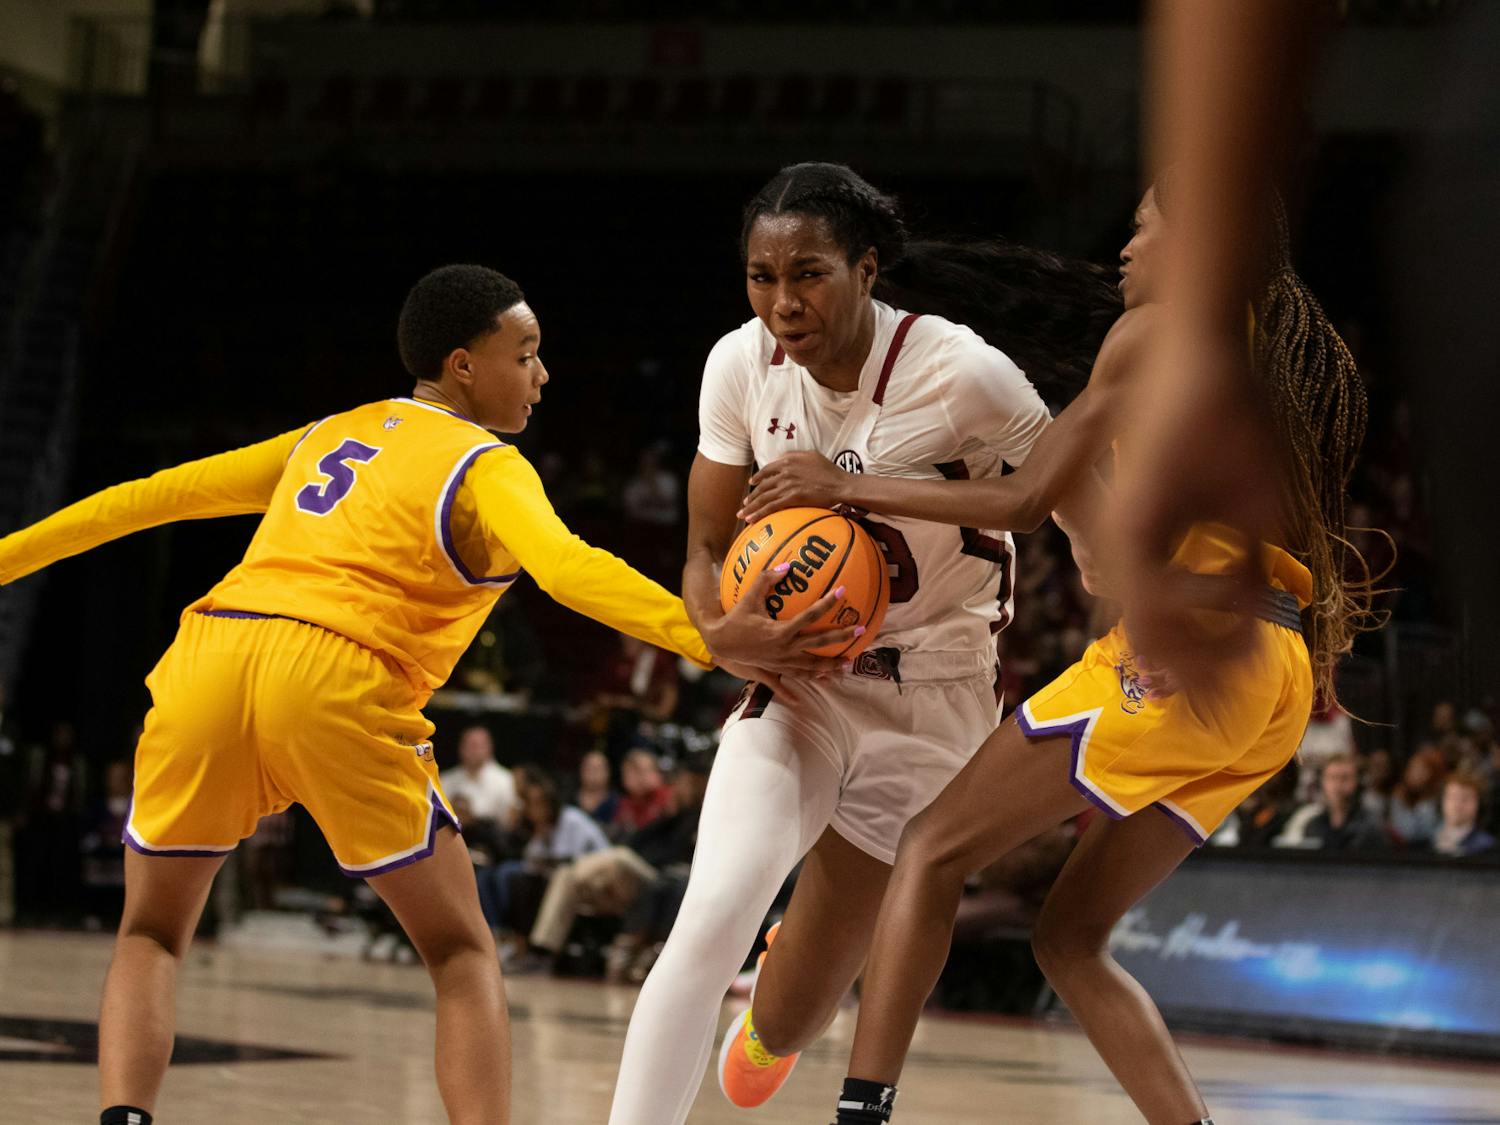 Sophomore guard Bree Hall gets fouled during the exhibition game against Benedict College at Colonial Life Arena on Oct. 31, 2022. The women’s basketball team went home with a dominant victory in its preseason exhibition match.